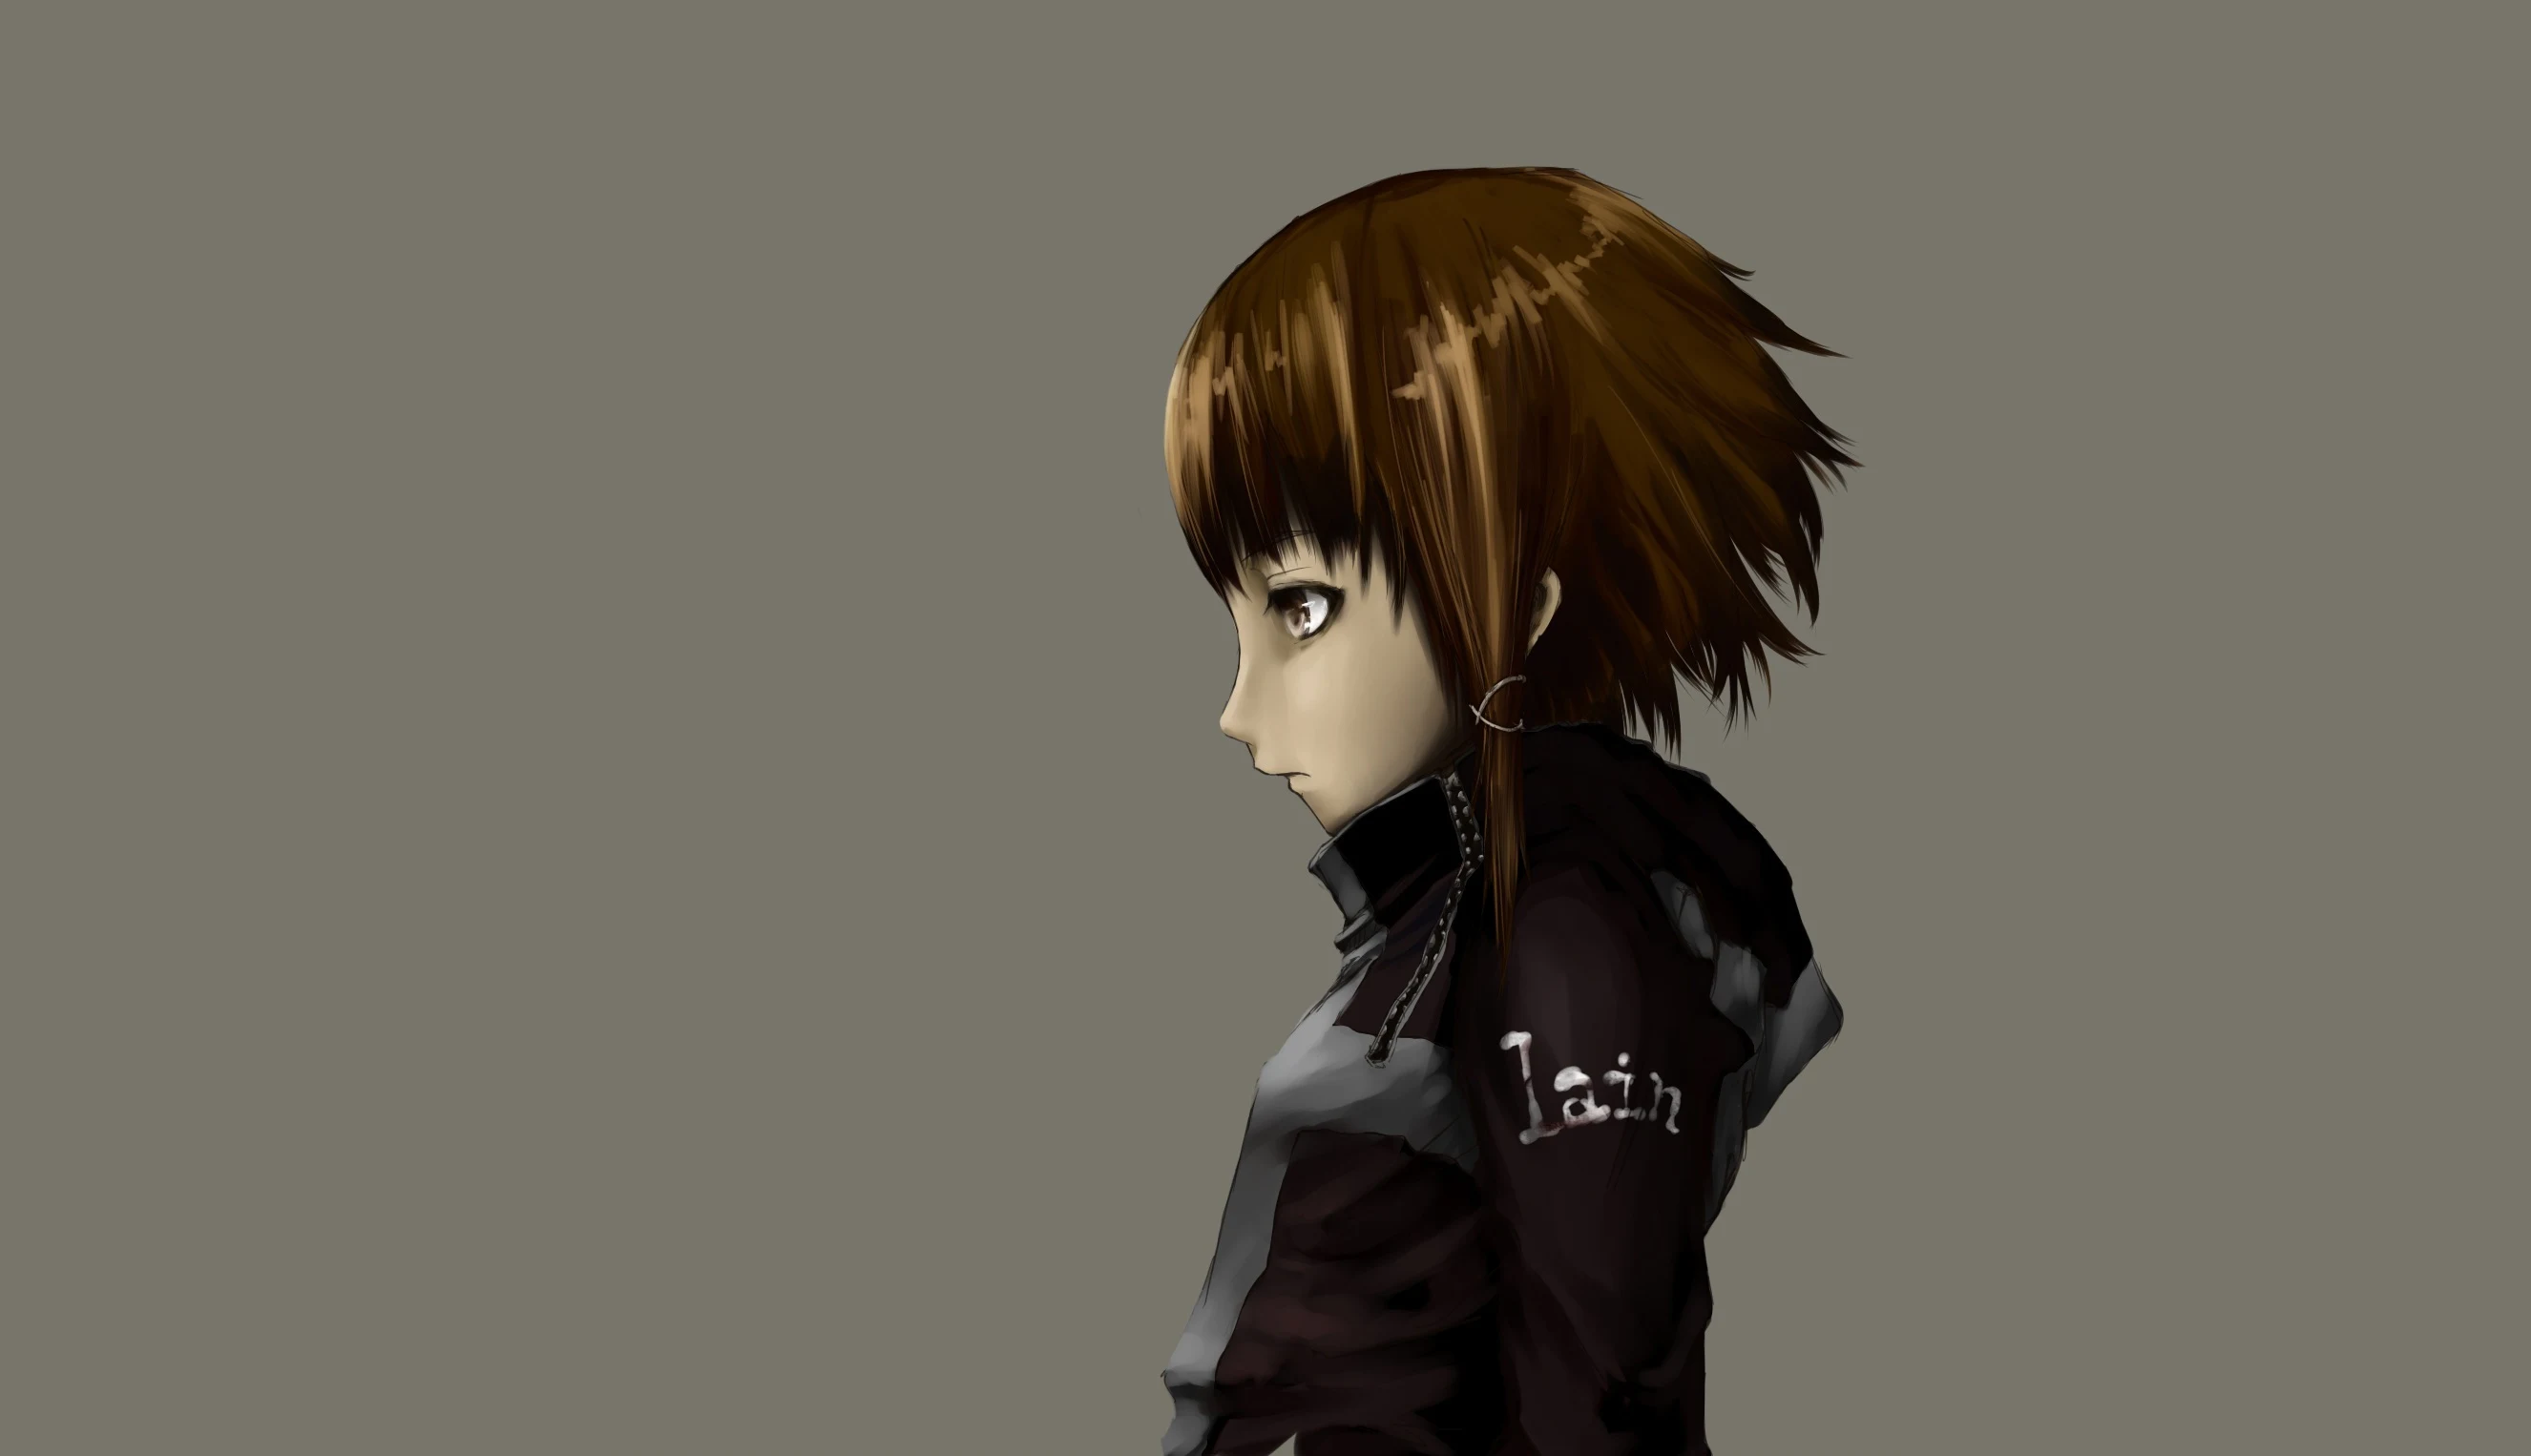 Latest Serial Experiments Lain Pic